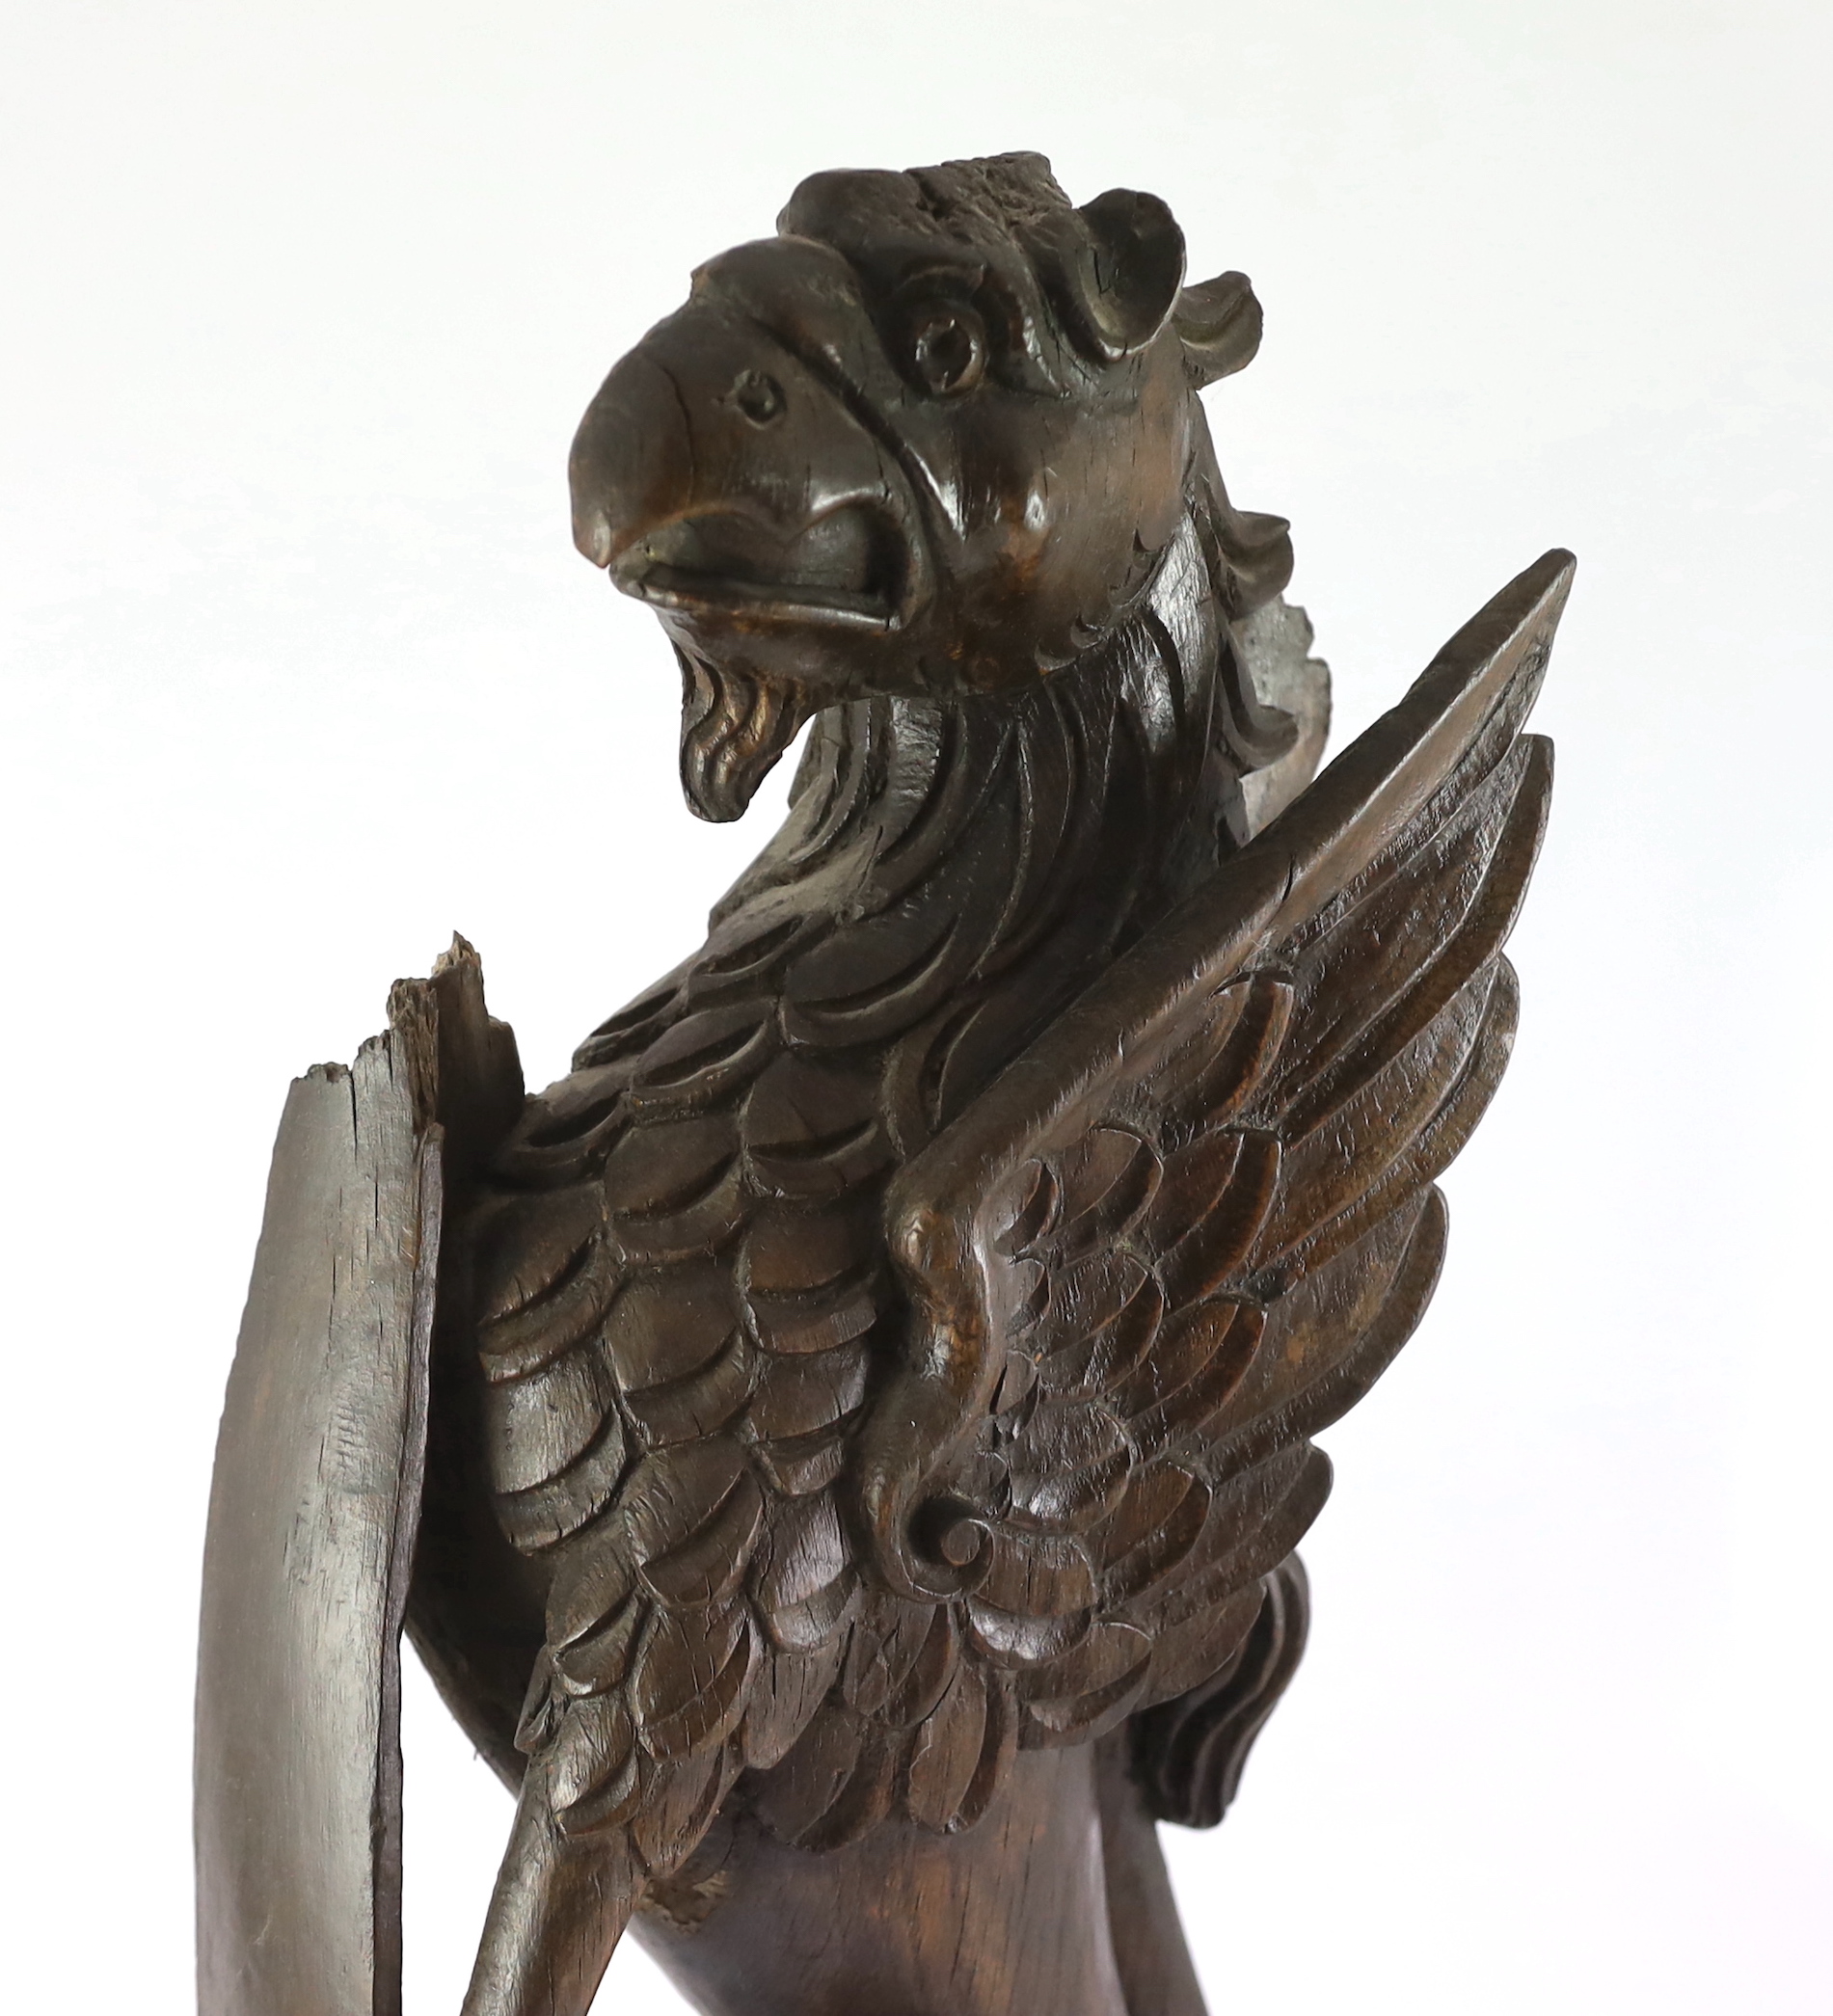 A 16th century Dutch carved oak model of a griffin rampant holding a shield